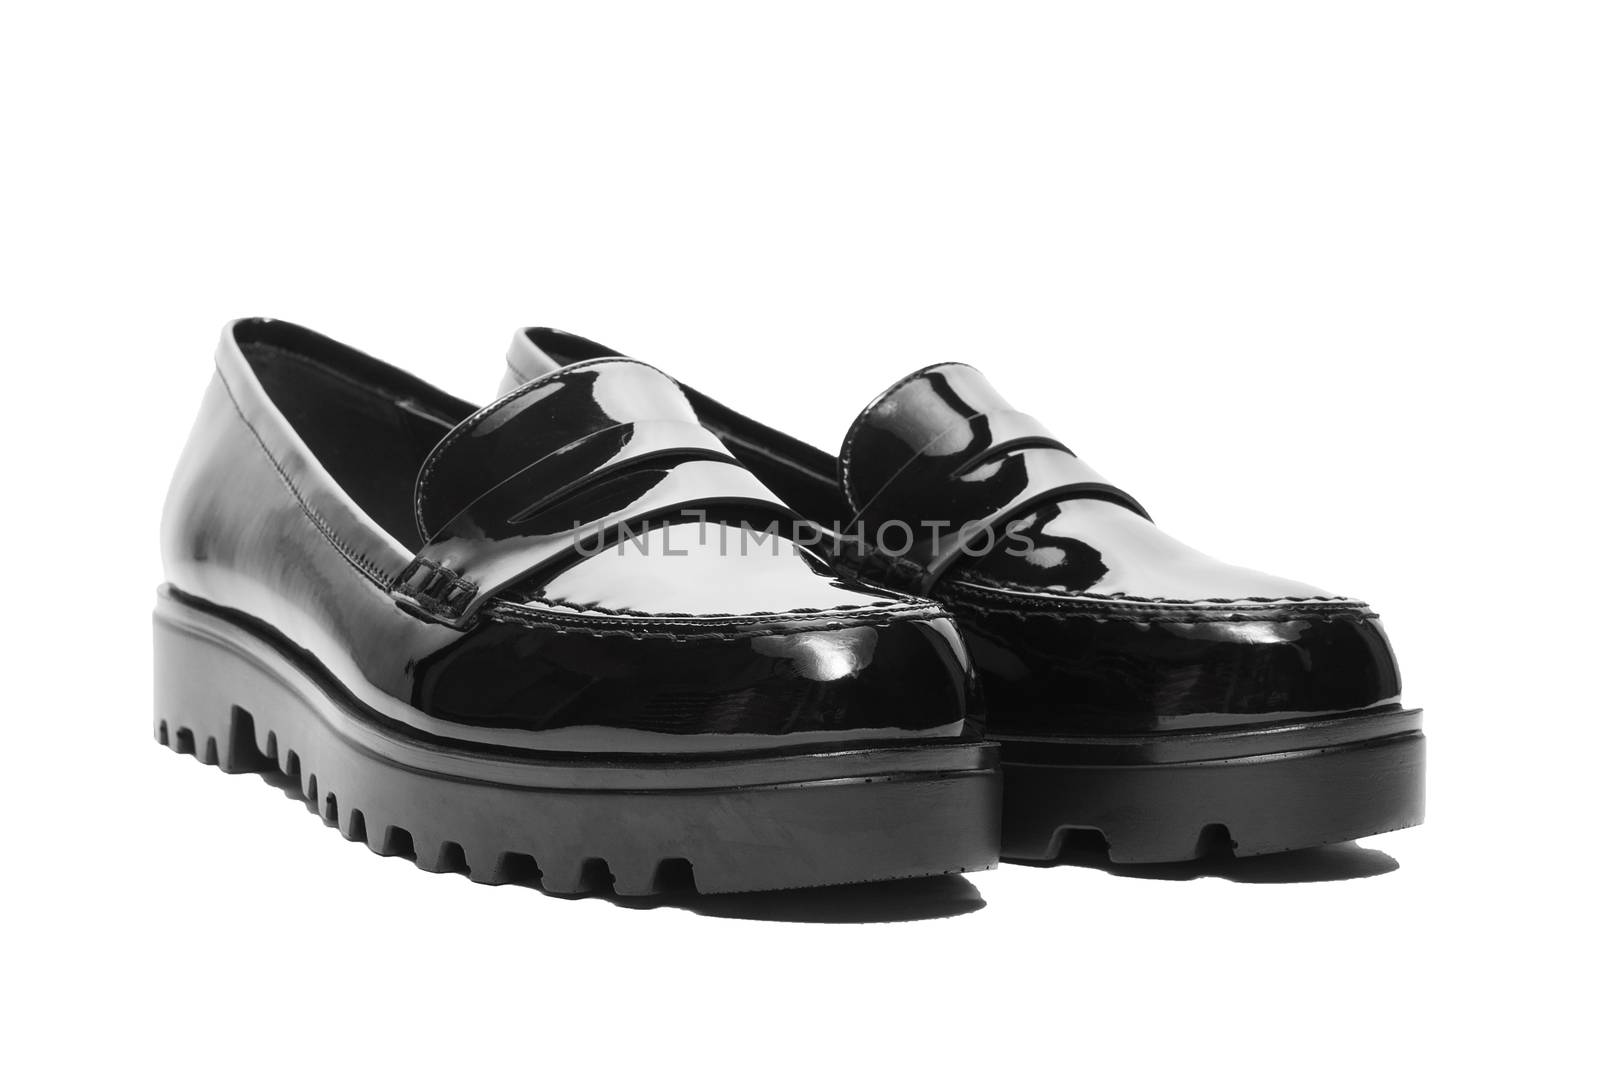 Female winter leather shoes on a white background, isolated, studio